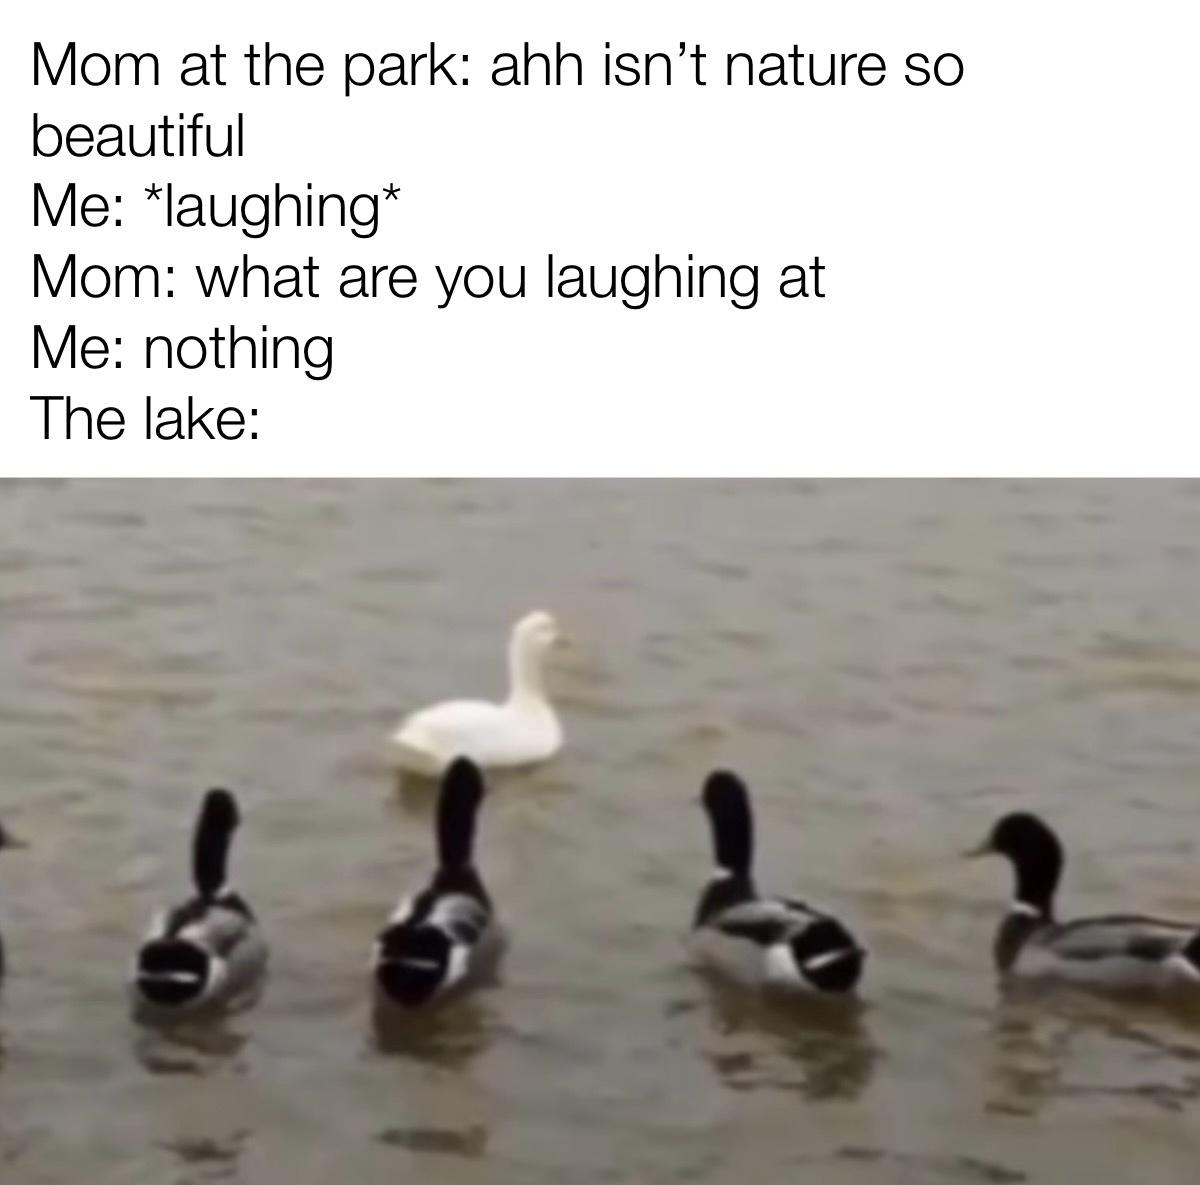 funny memes - dank memes - did you take - Mom at the park ahh isn't nature so beautiful Me laughing Mom what are you laughing at Me nothing The lake